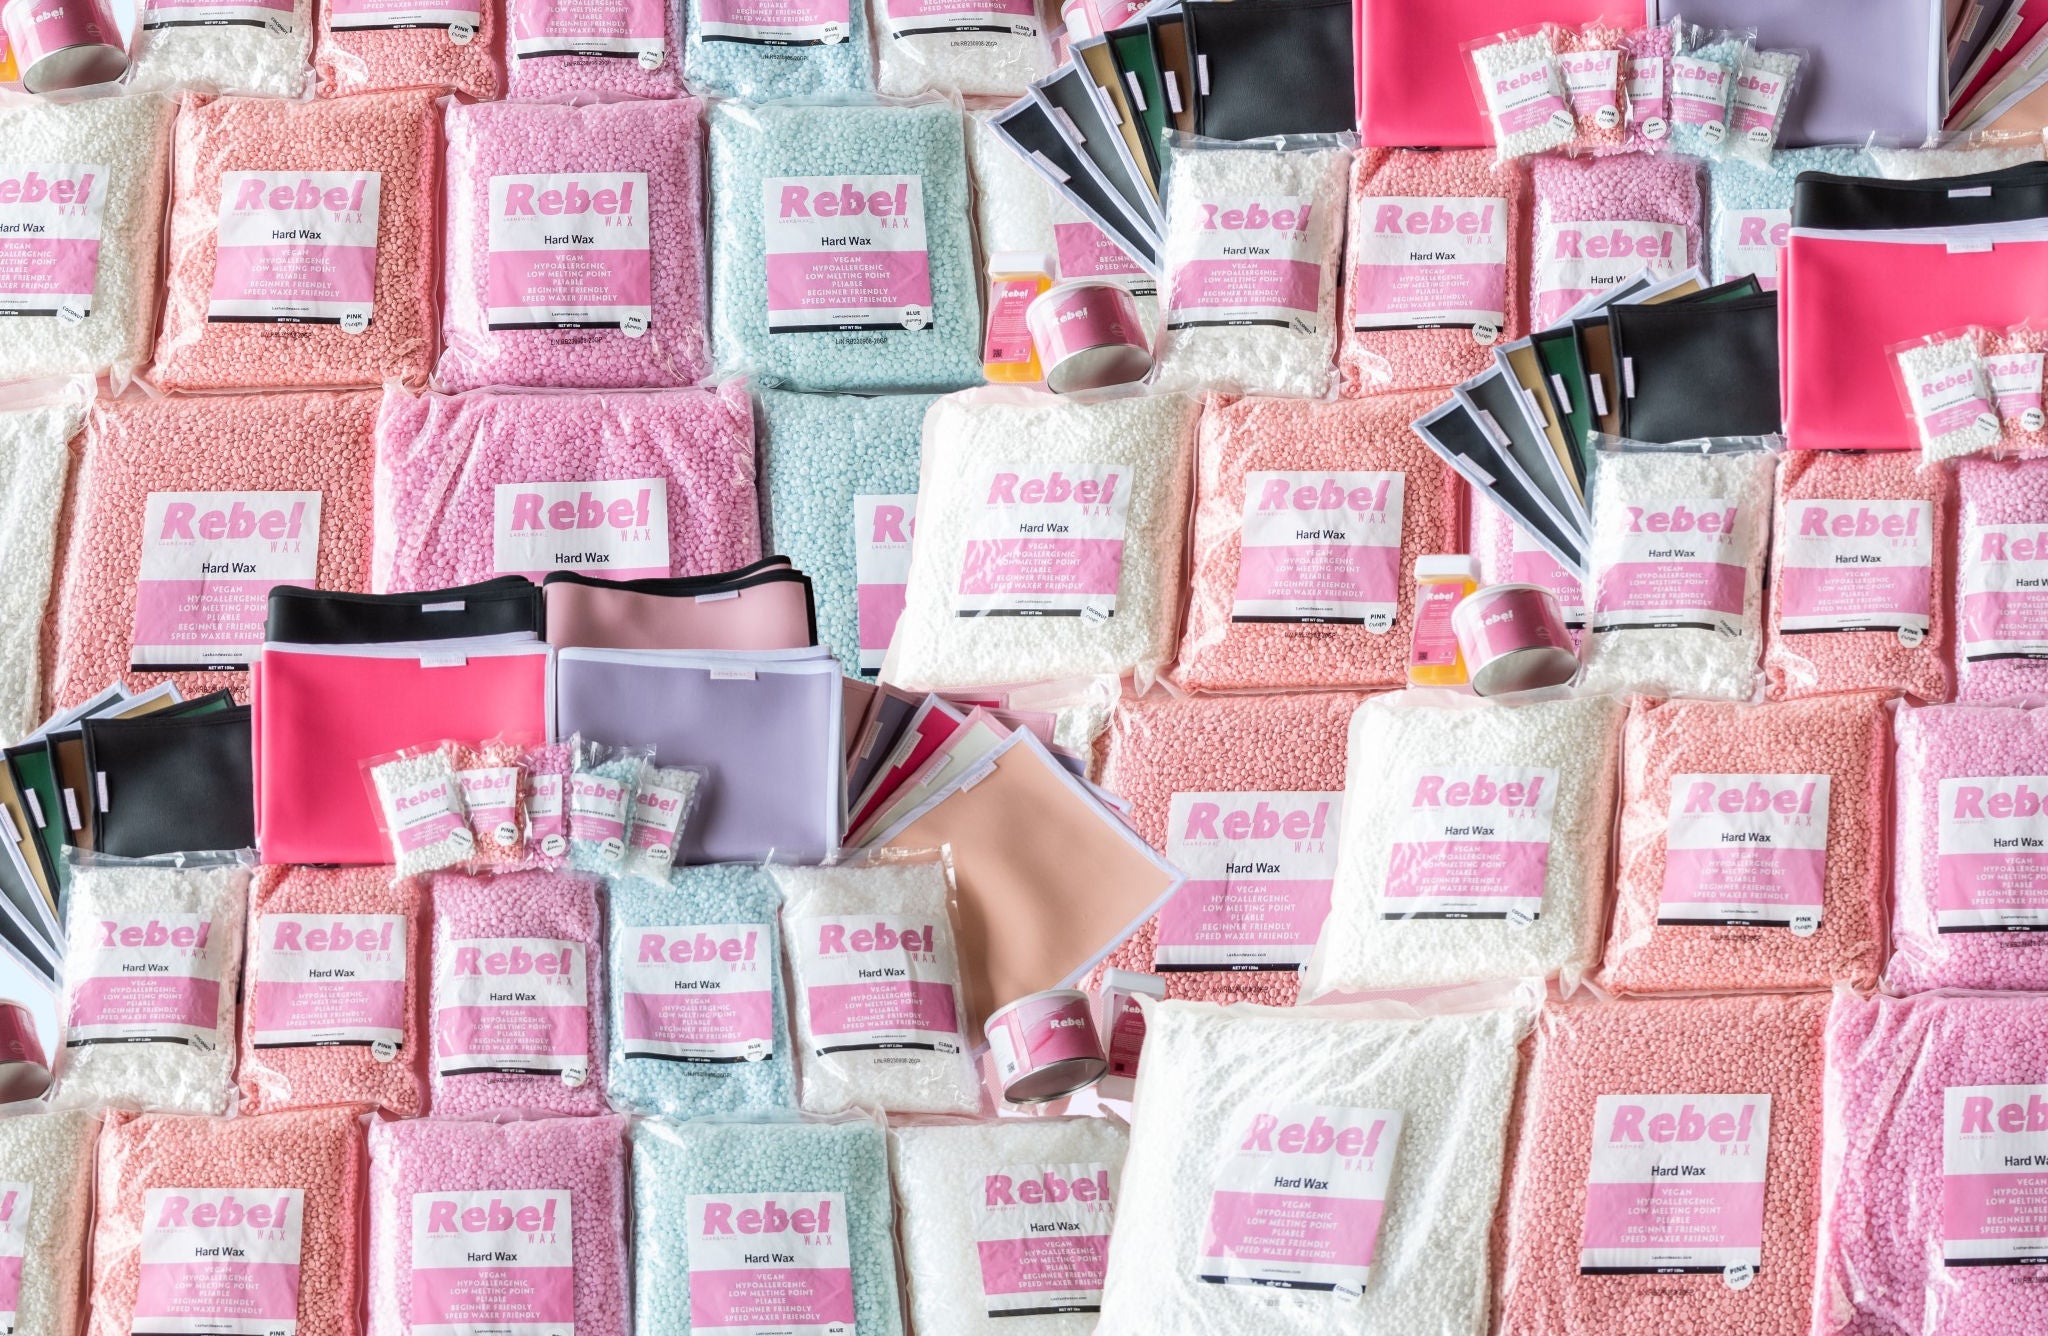 Photo of a stockpile of bags of Rebel hard wax beads for hair removal and bags of Rebel soft wax.